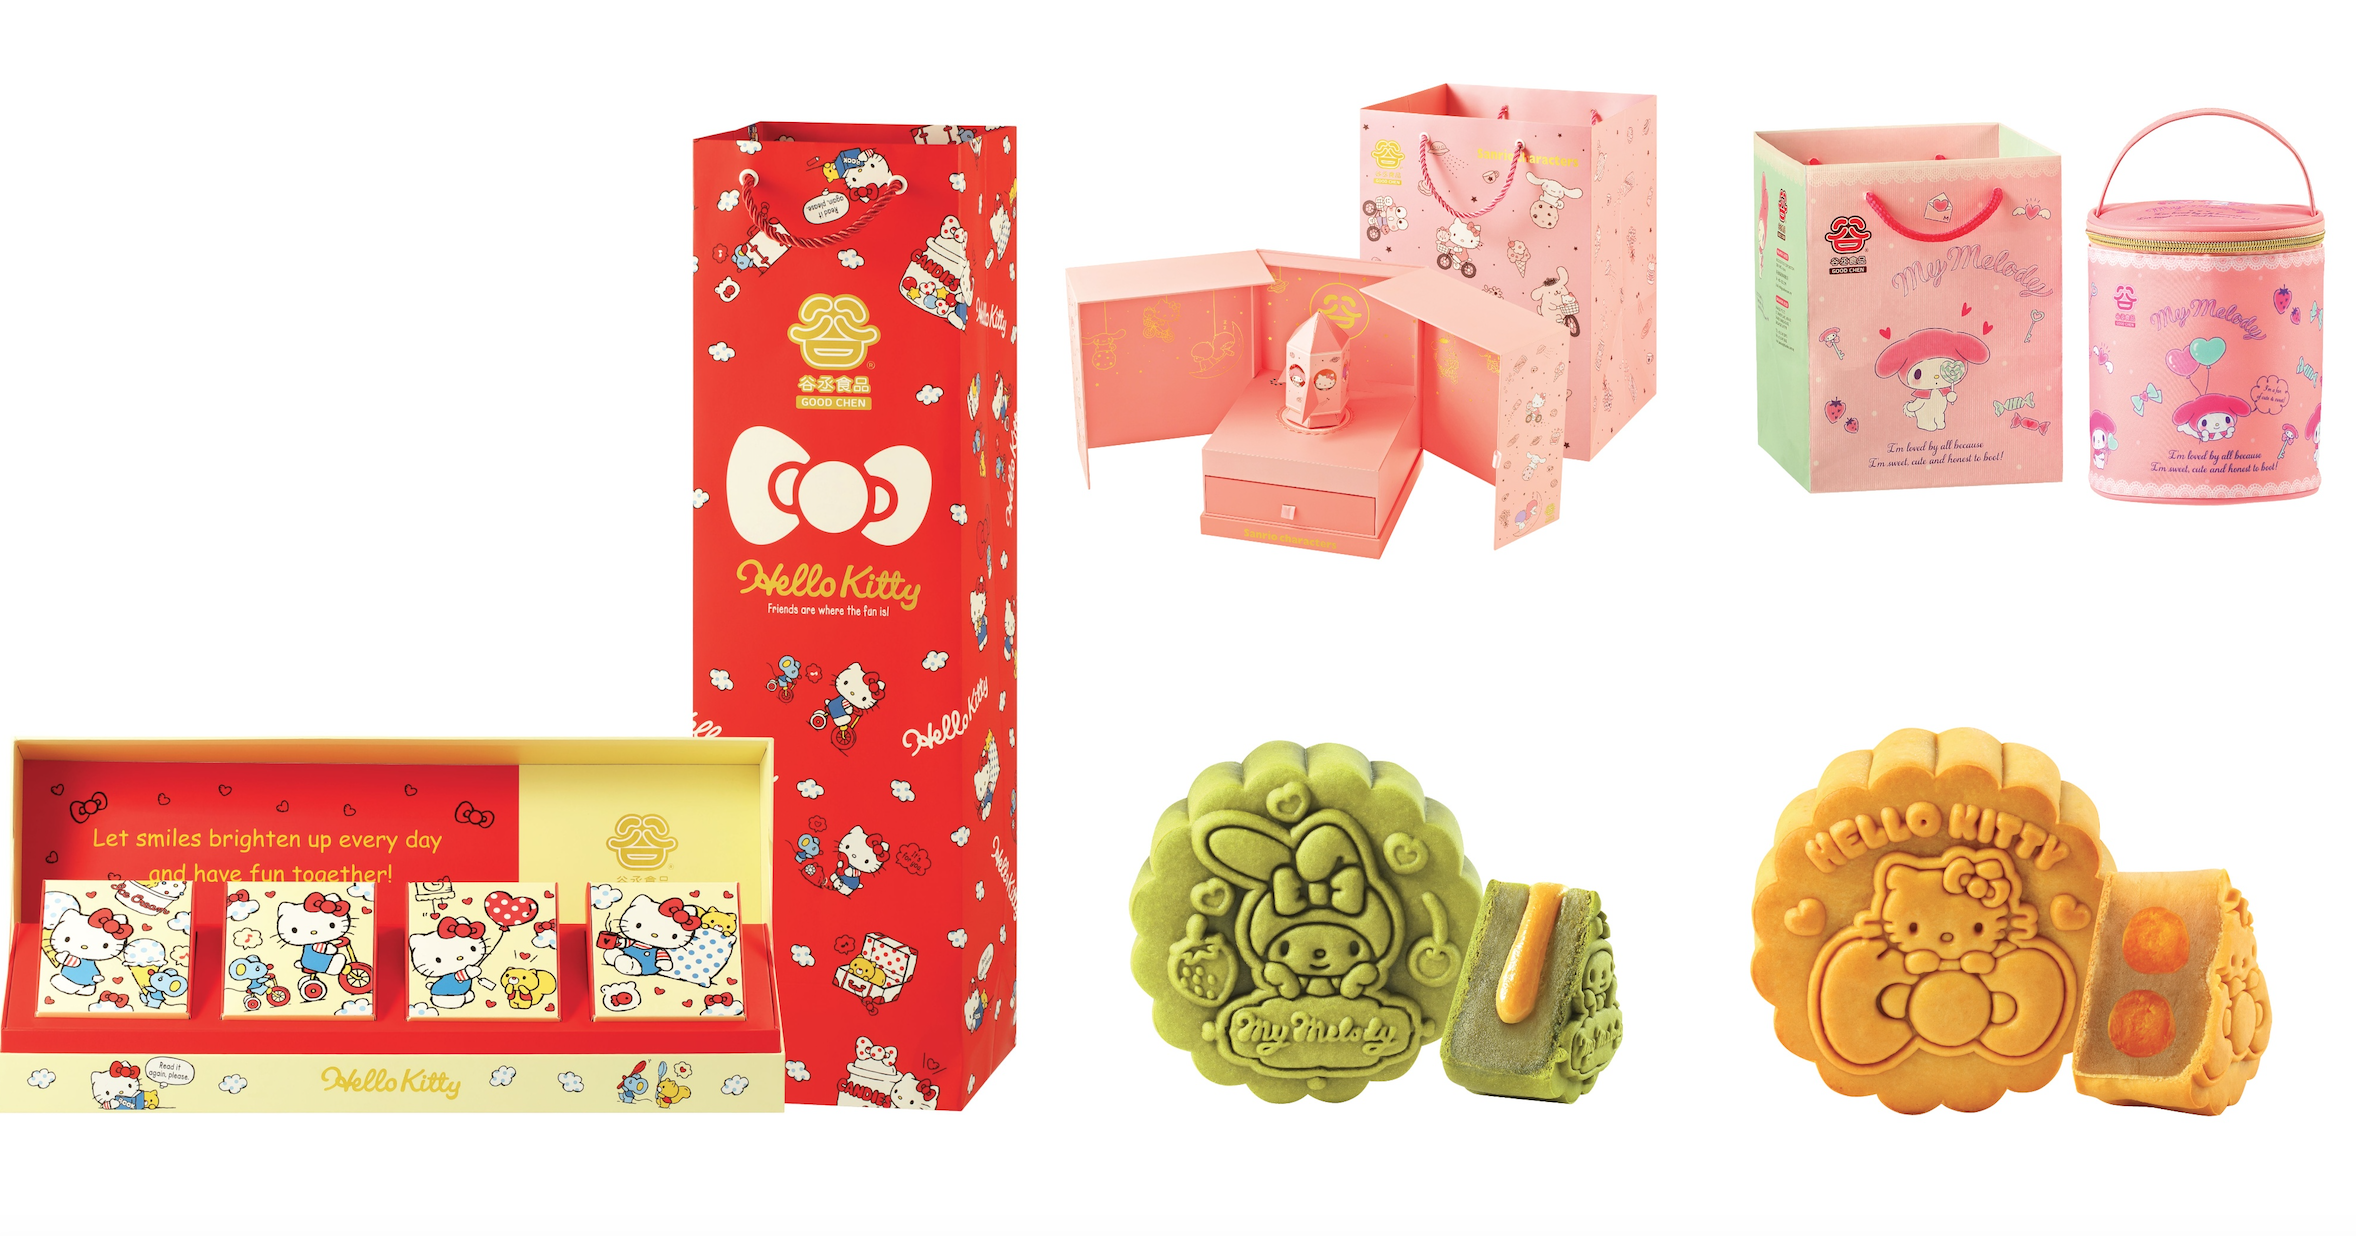 Sanrio-themed mooncake sets available at Cheers & FairPrice Xpress